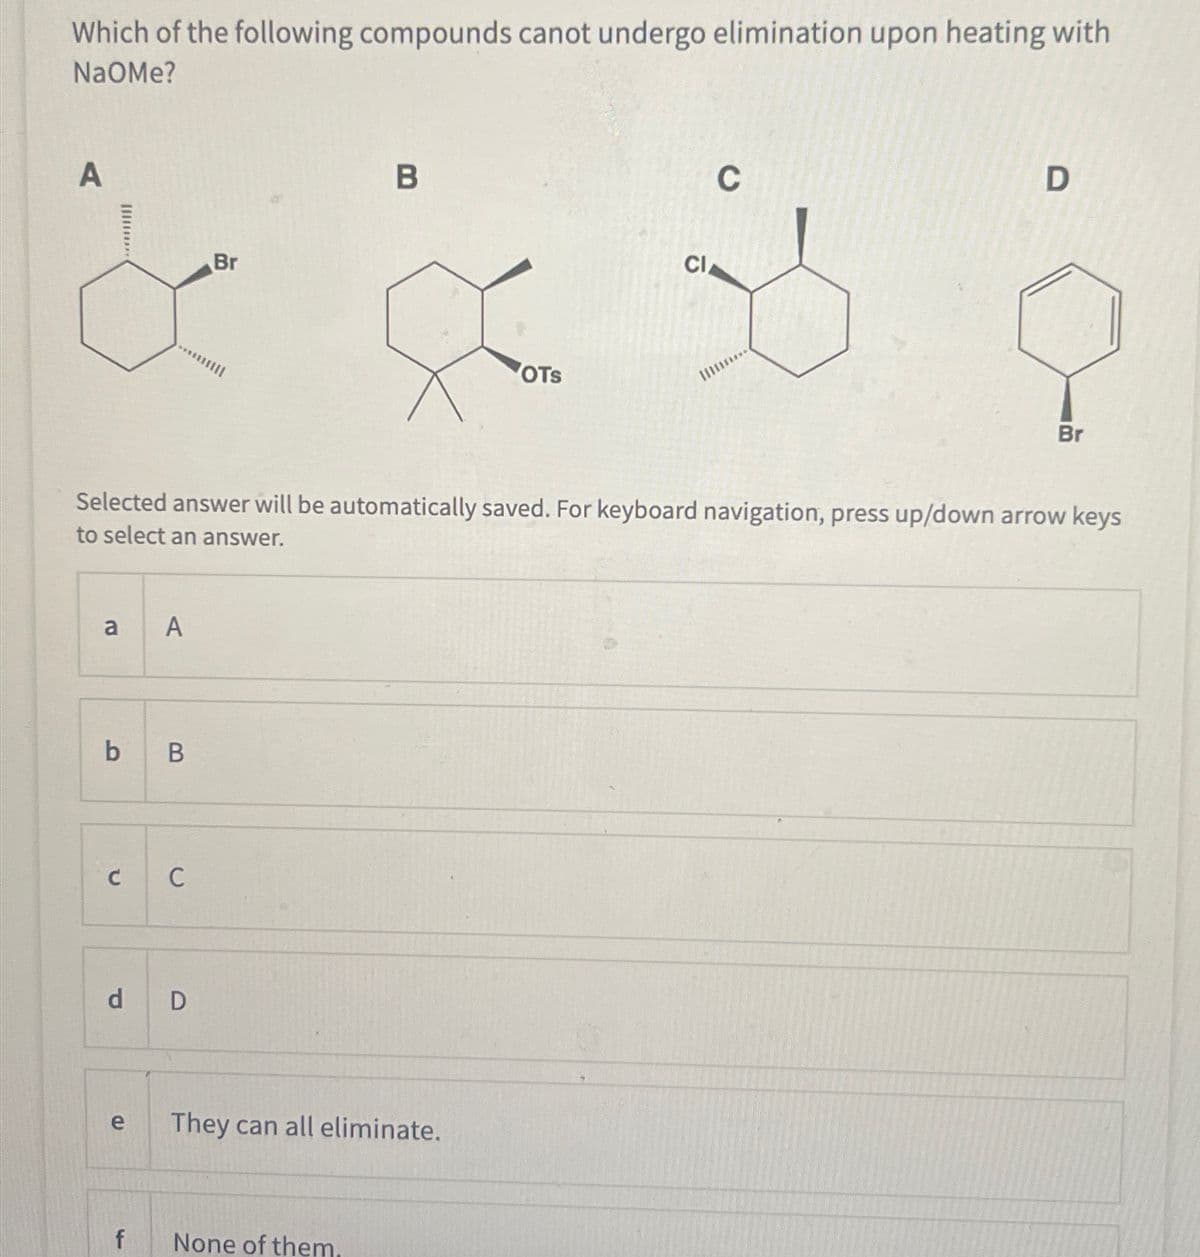 Which of the following compounds canot undergo elimination upon heating with
NaOMe?
A
Br
B
OTS
CI
C
D
Br
Selected answer will be automatically saved. For keyboard navigation, press up/down arrow keys
to select an answer.
a
A
b B
C C
d D
e
They can all eliminate.
f
None of them.